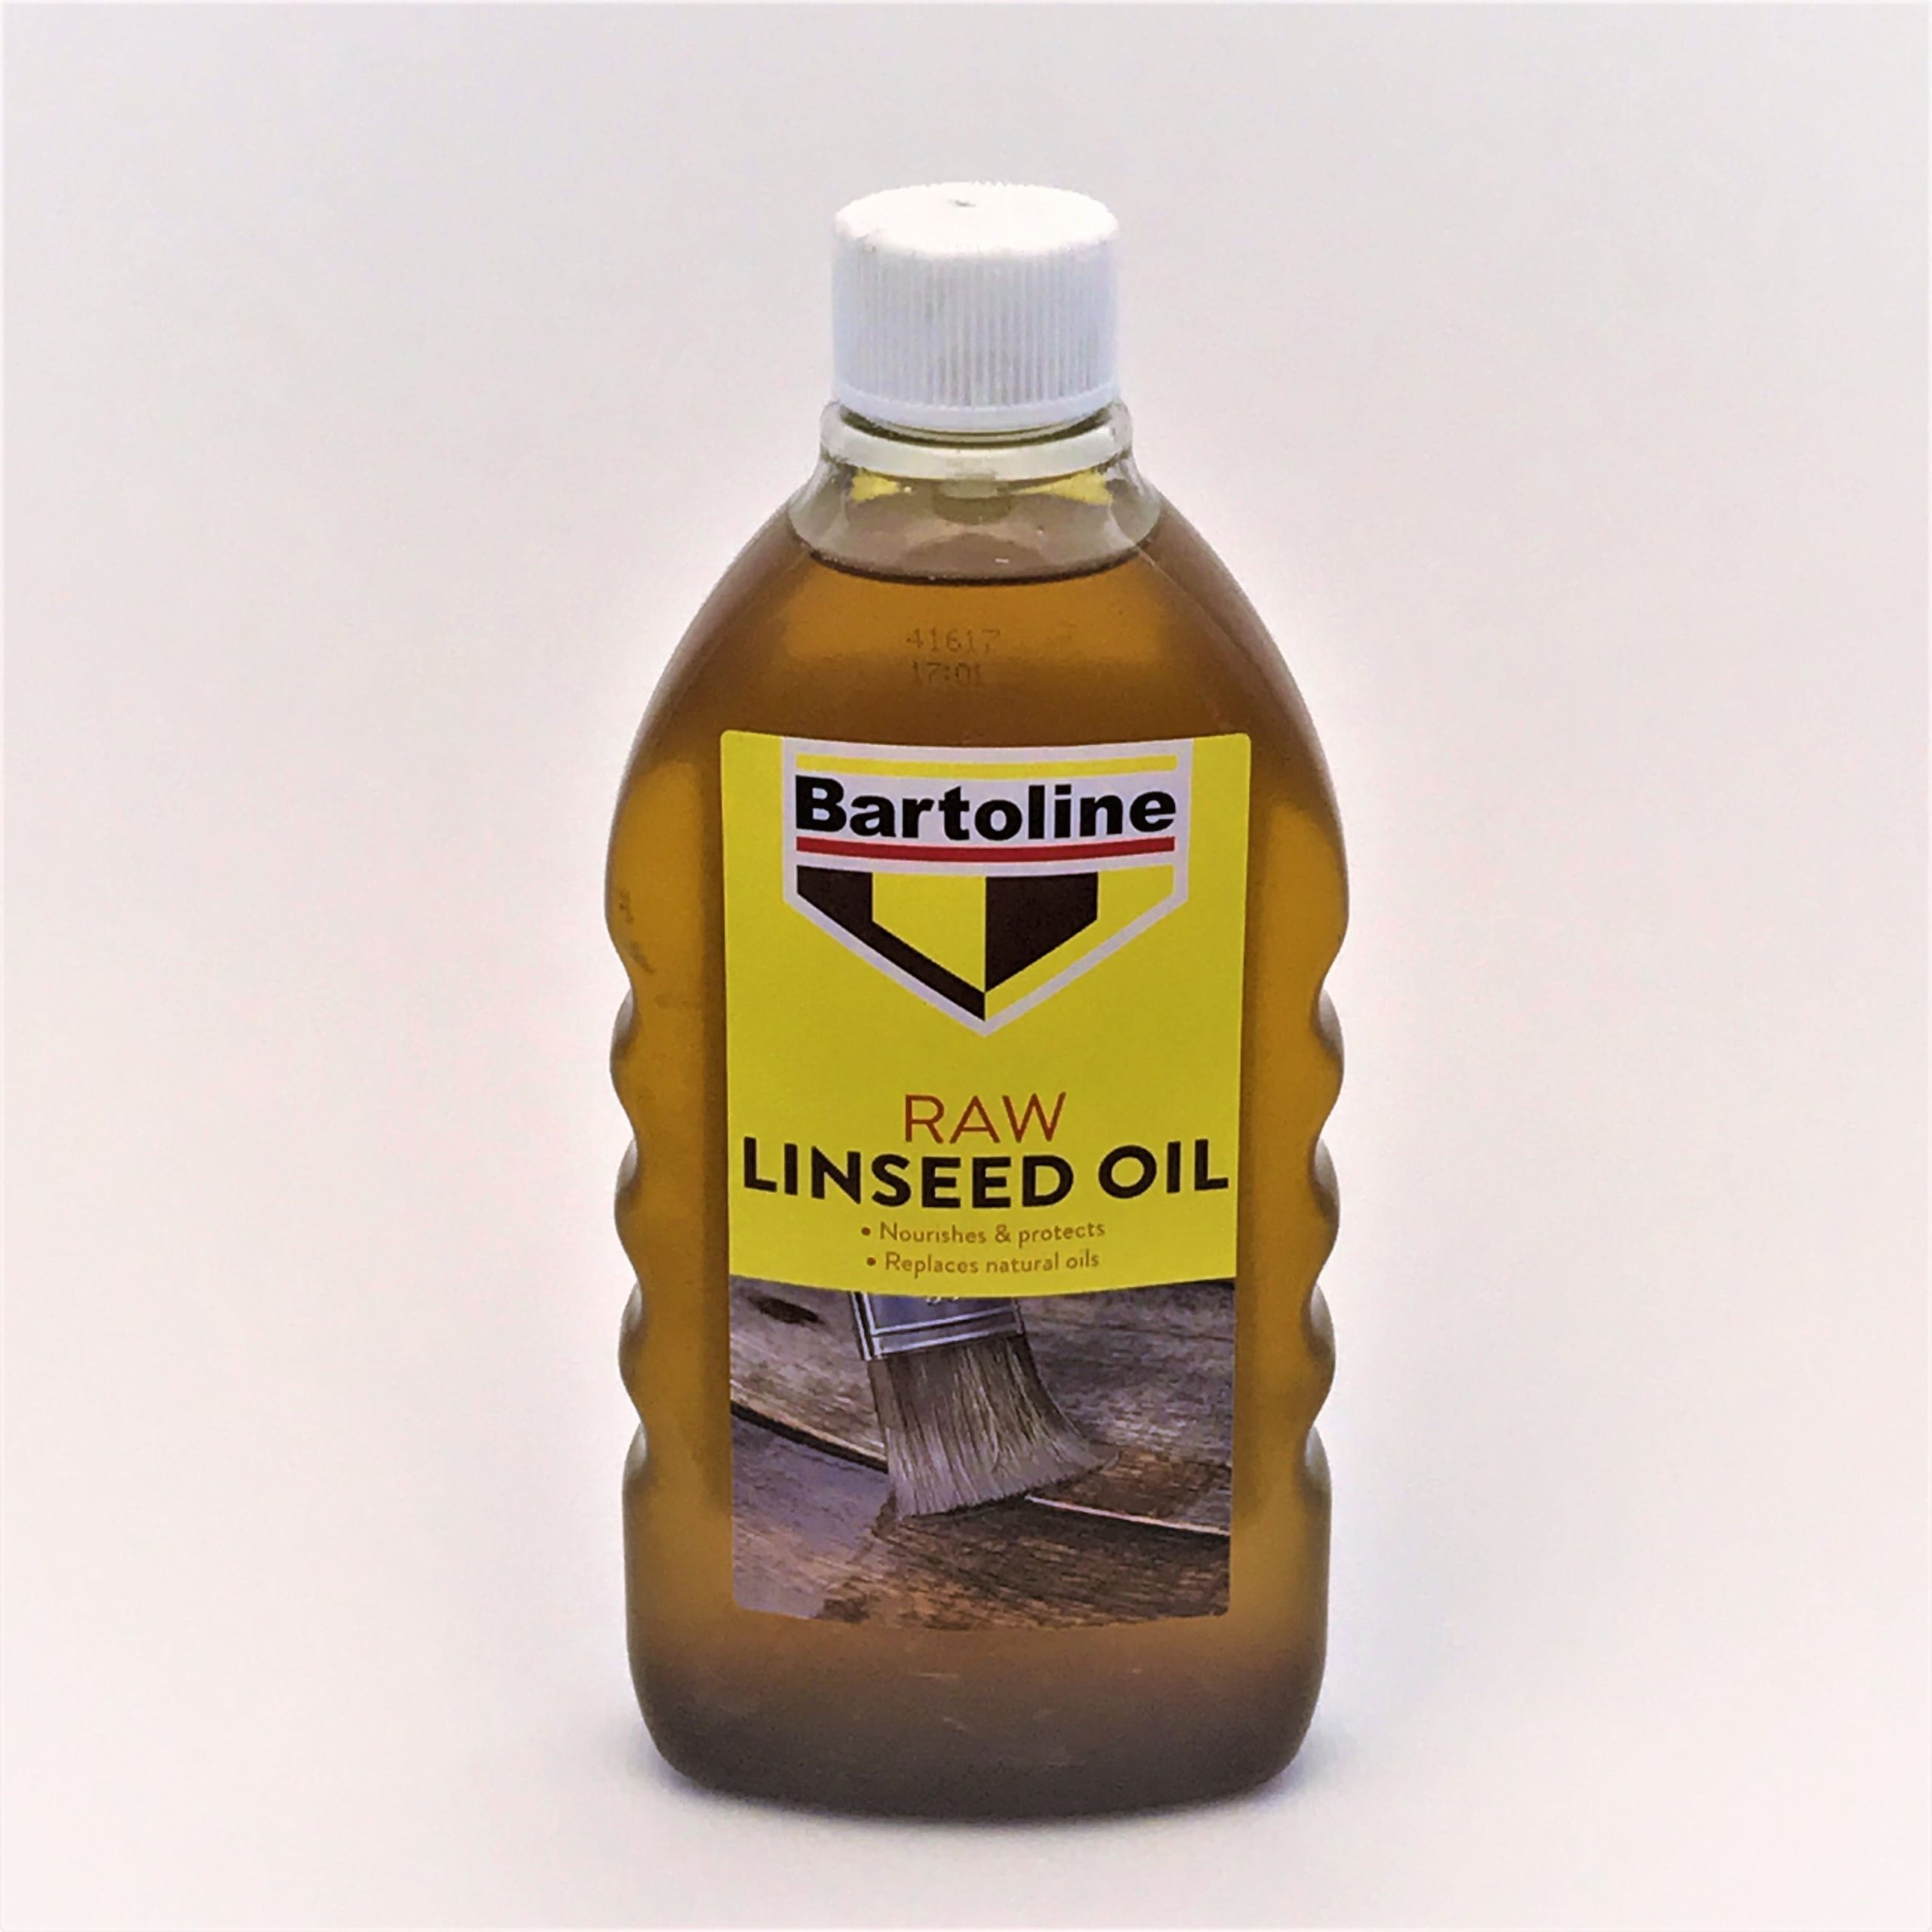 Raw Linseed Oil 500ml